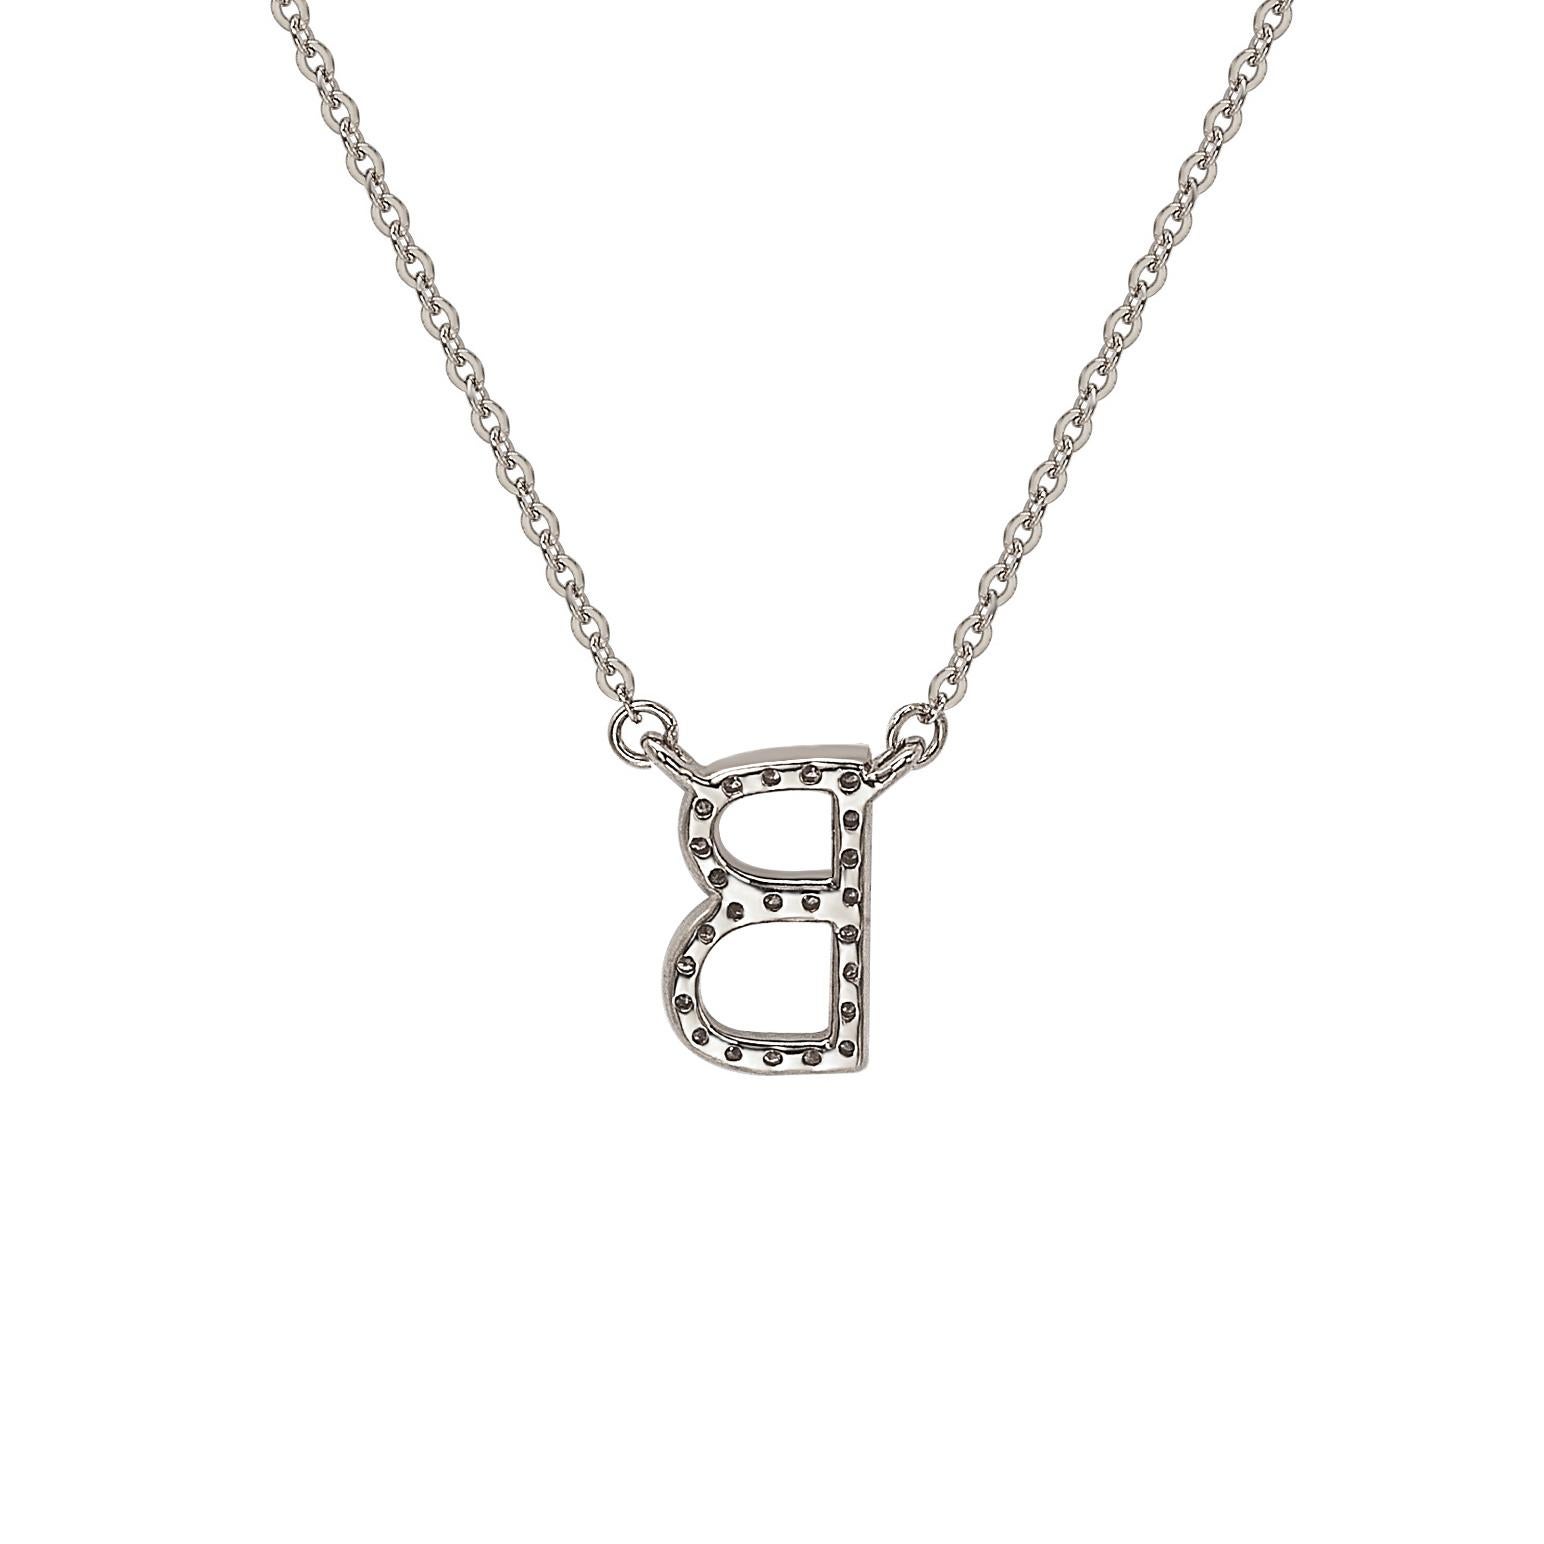 This breathtaking personalized Suzy Levian letter necklace features natural diamonds, hand-set in 14-Karat white gold. It's the perfect individualized gift to let someone special know you're thinking of them. Each letter necklace features a row of